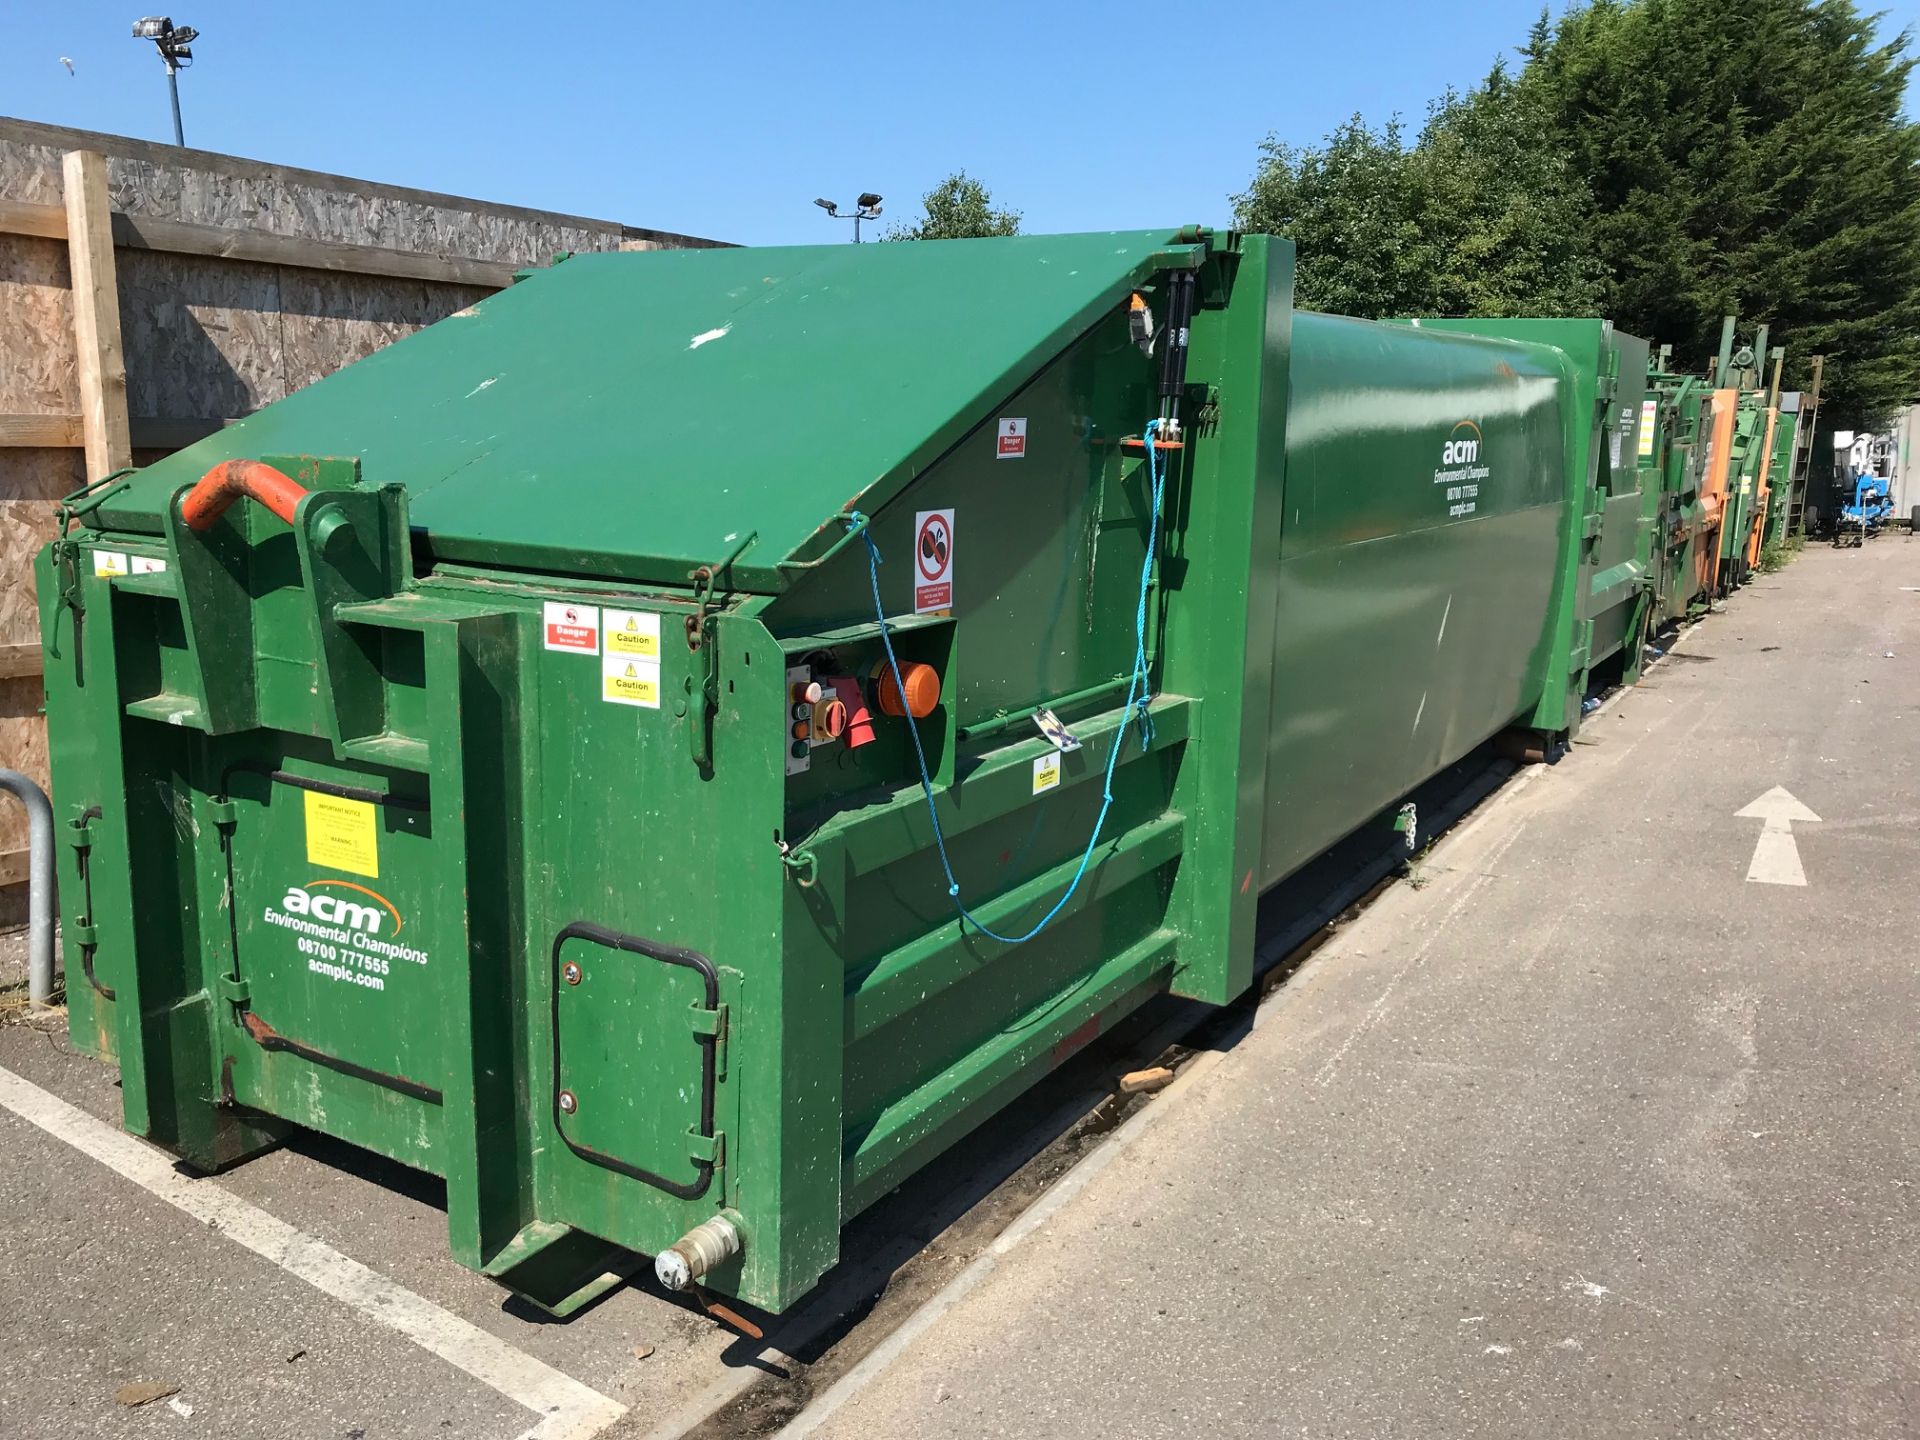 ACMP22 26 CUBIC METRE WASTE COMPACTION SKIP. CAN PACK 5 TO 1 RATIO (2015) - Image 2 of 3